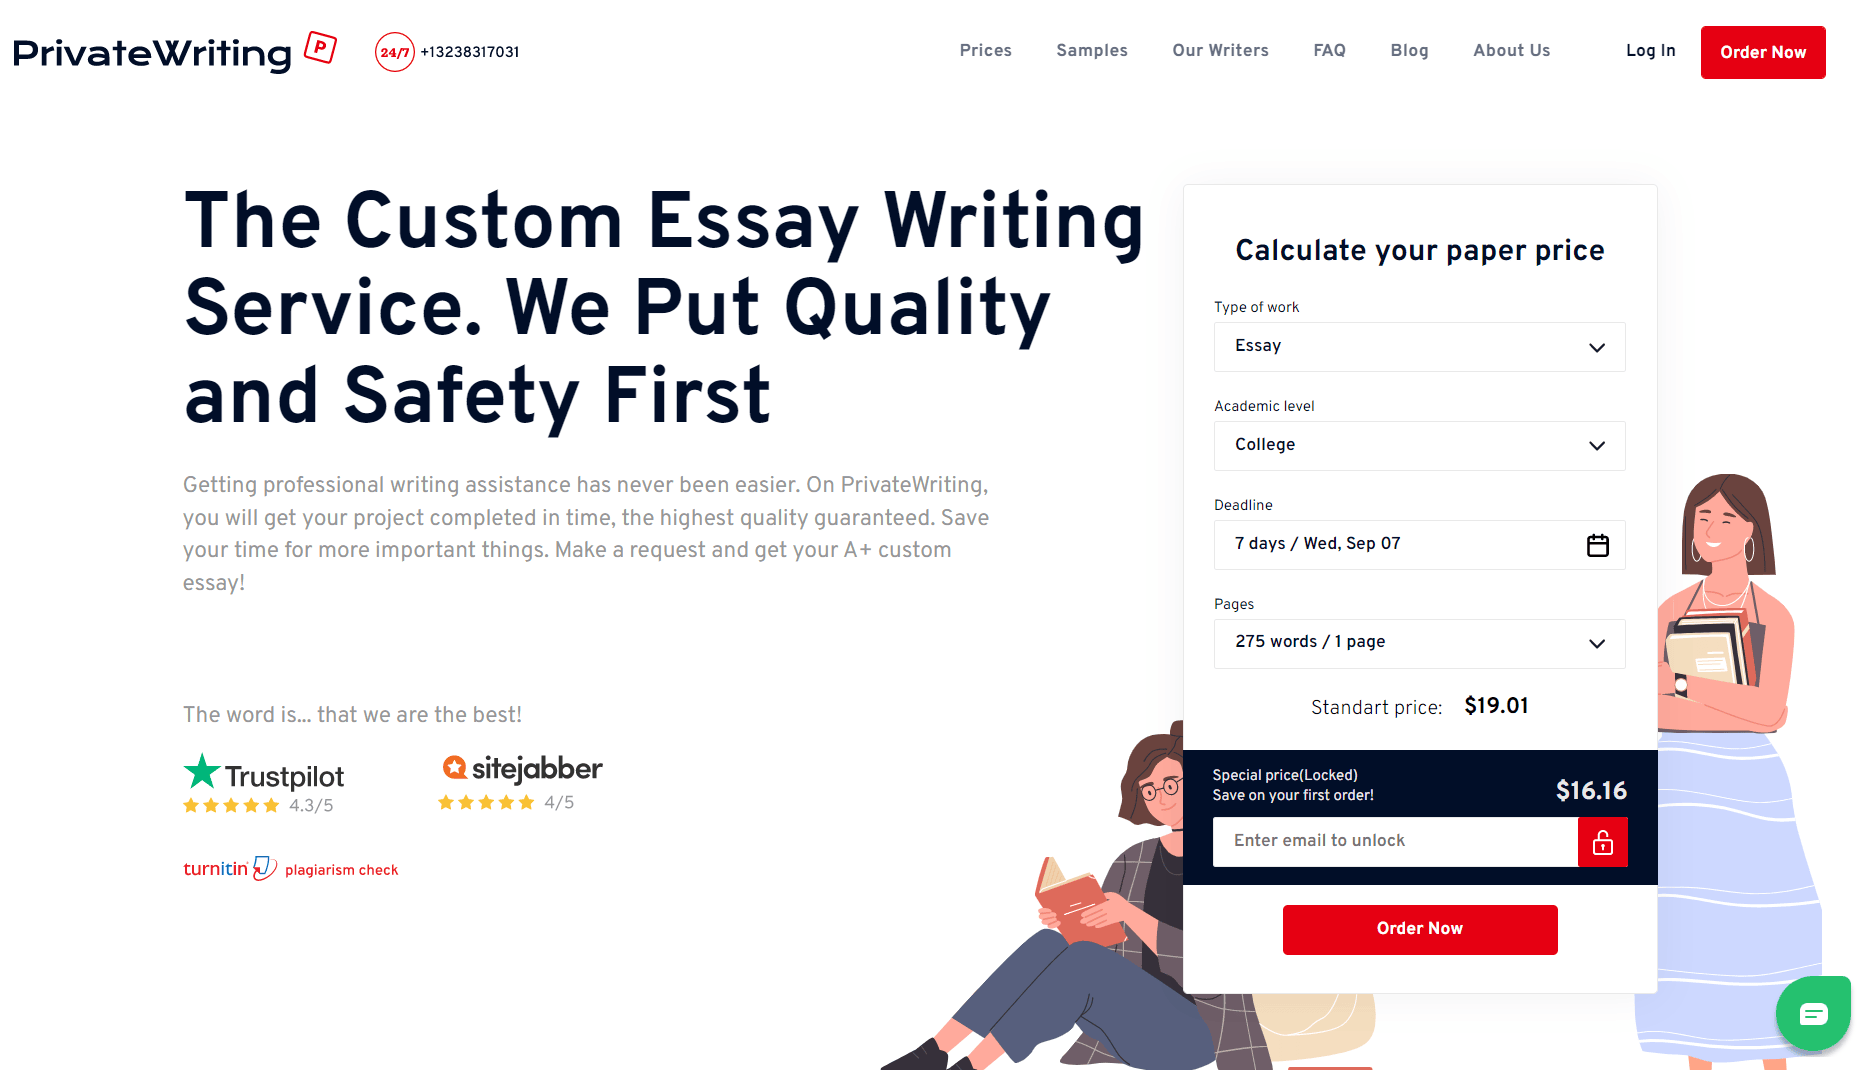 privatewriting review